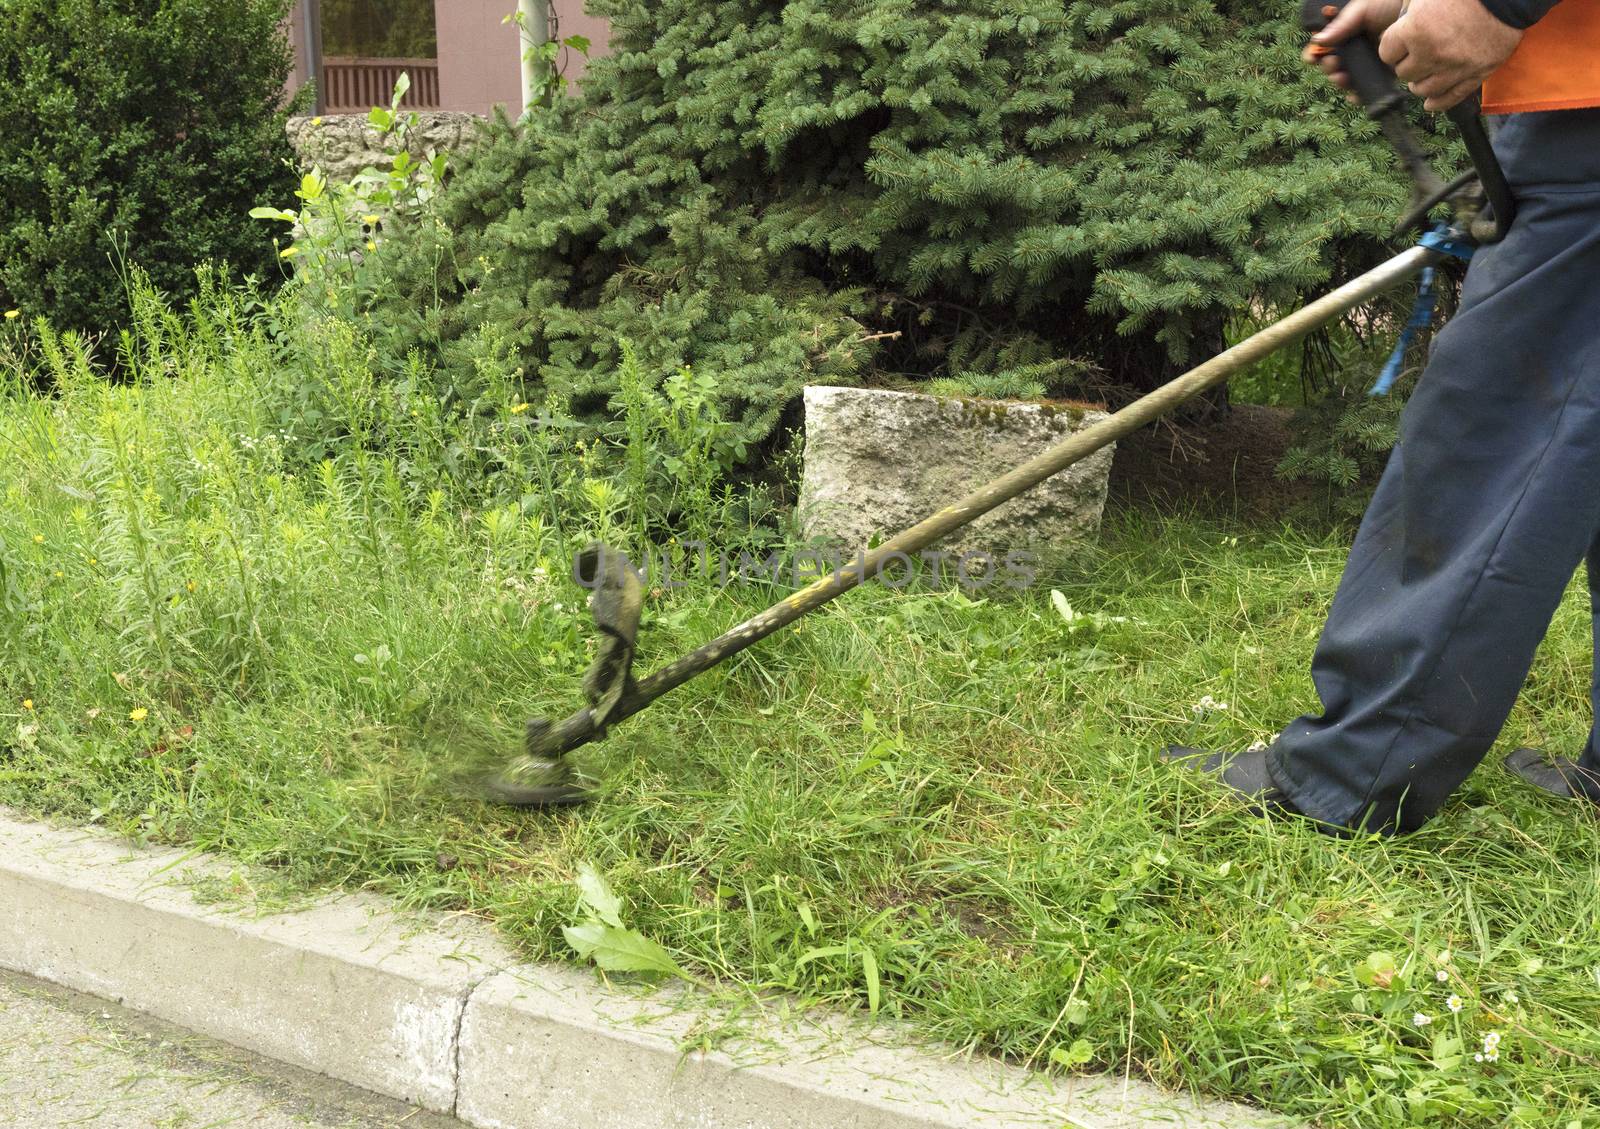 Worker with a gasoline trimming grass cares for an urban lawn near the sidewalk